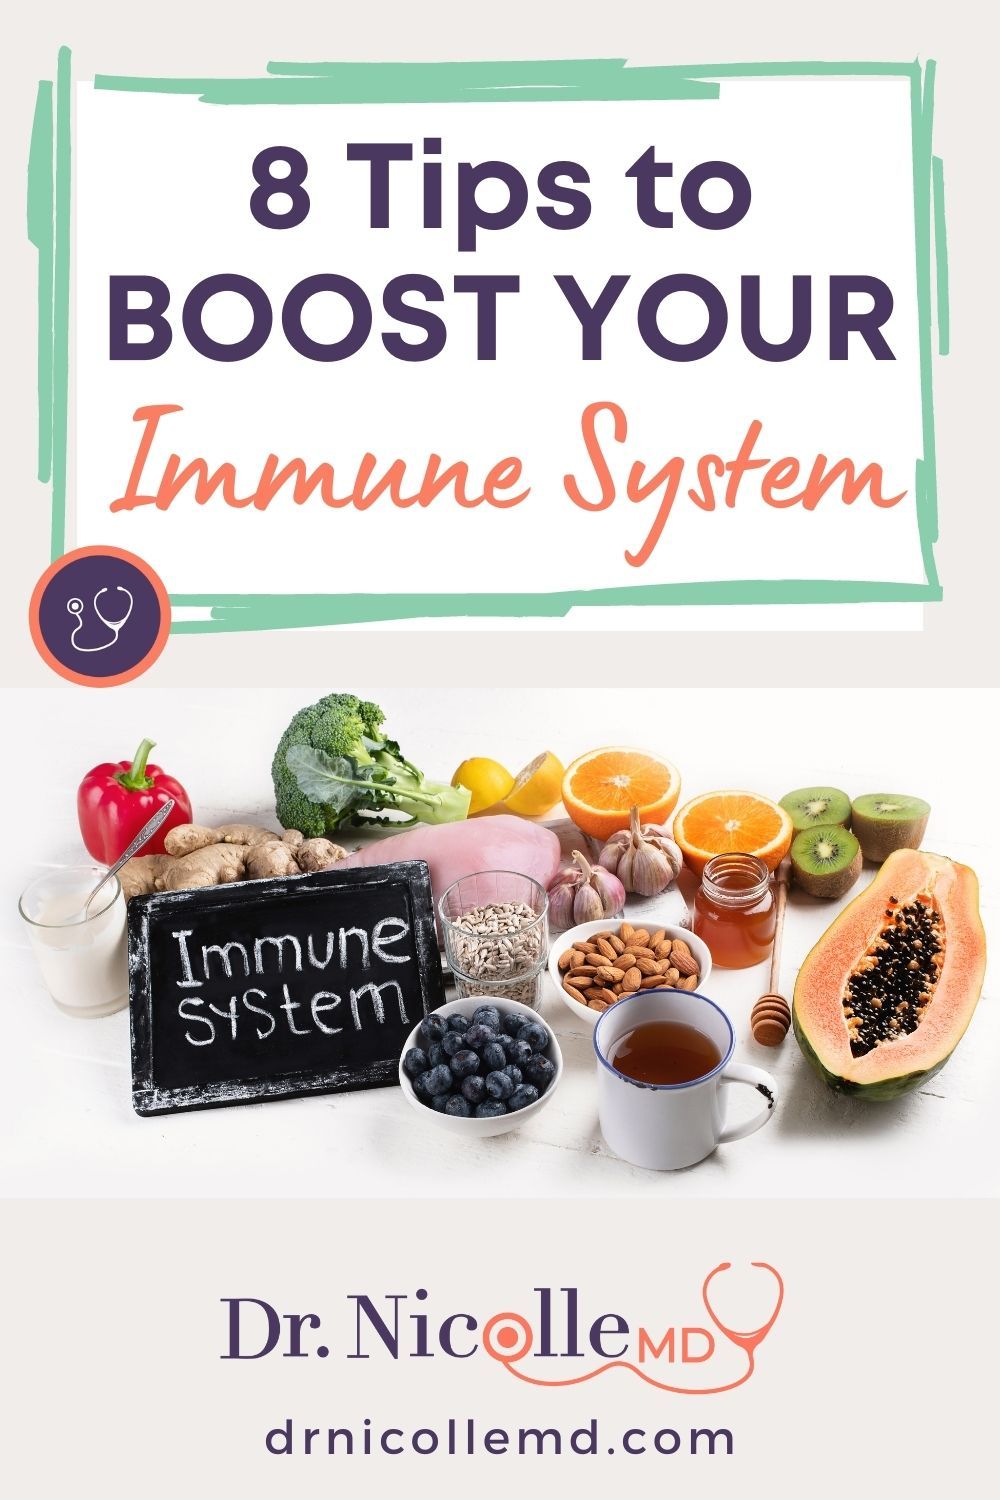 8 Tips to Boost Your Immune System